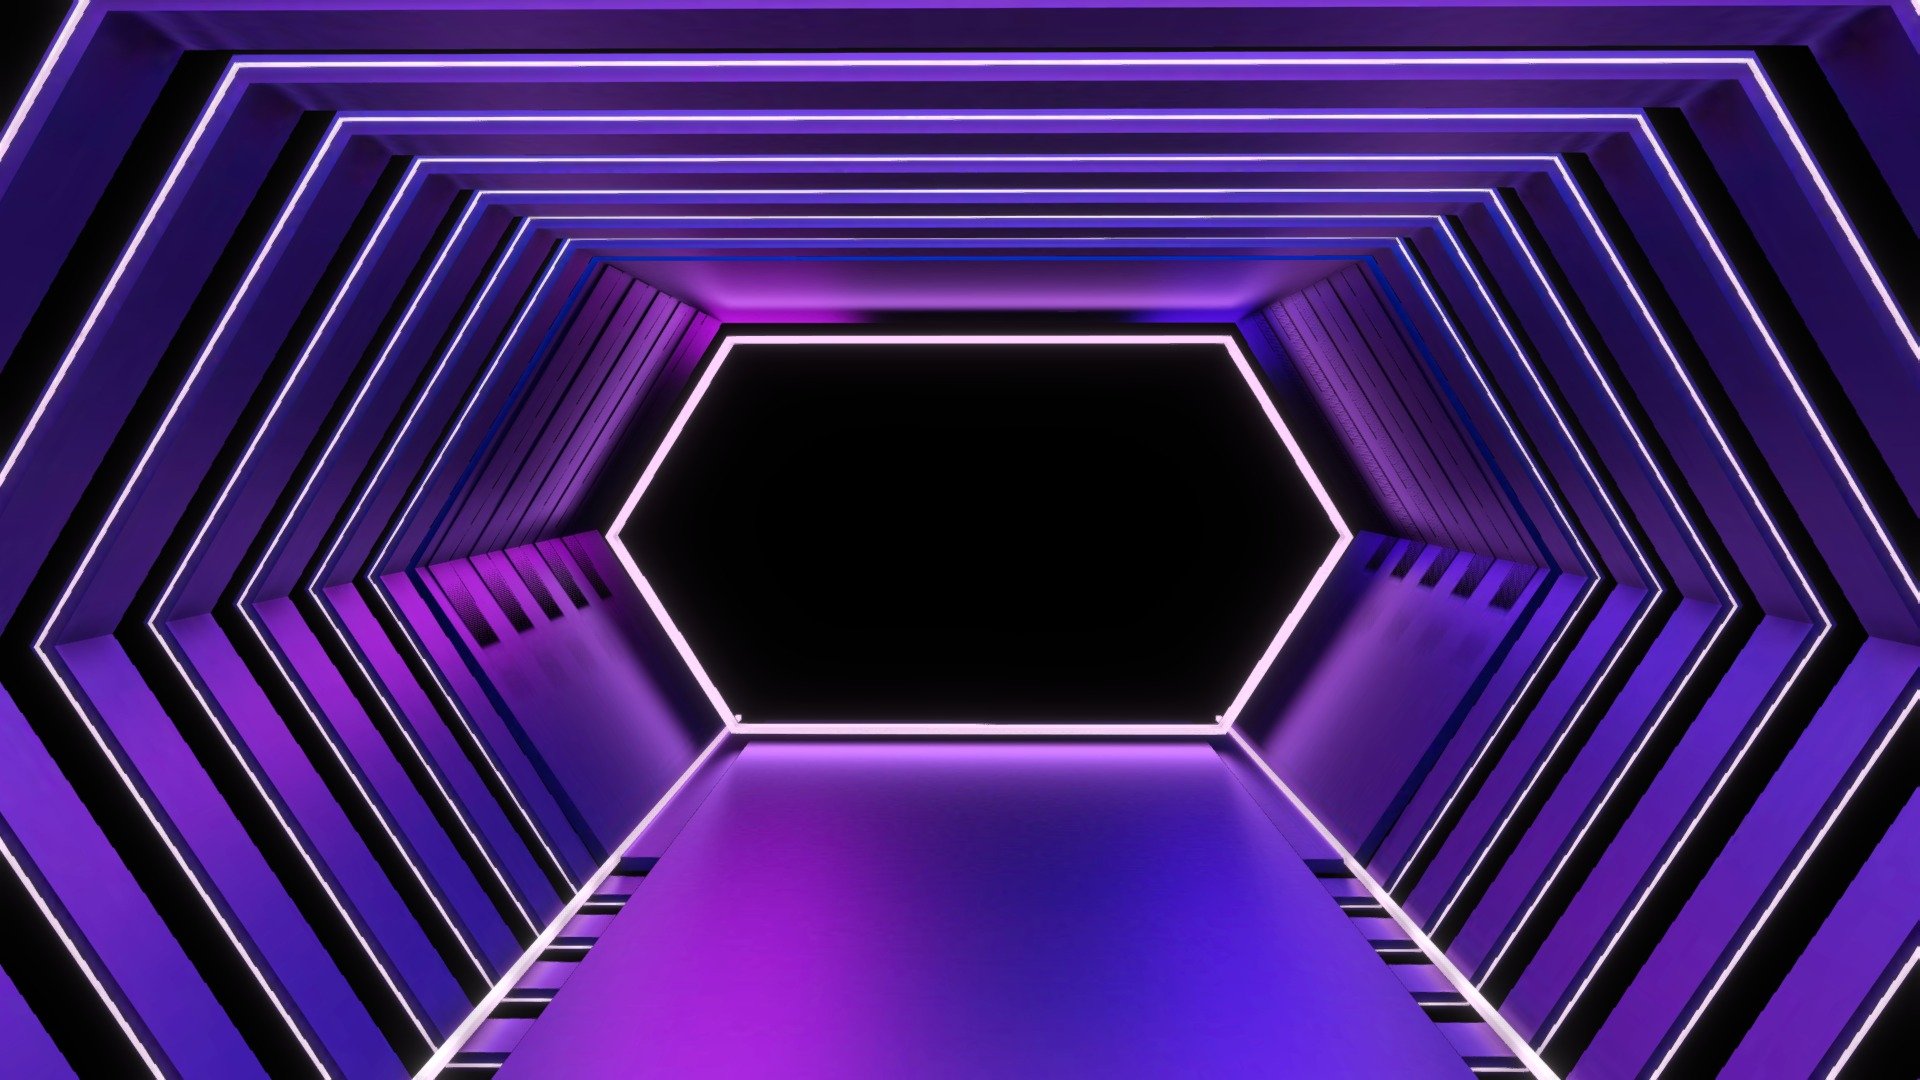 Stereoscopic corridor with hexagon neon lights. It can also be used as a stage platform, like vr dancing show or music gaming.

Textures already baked, 4K resolution 3d model